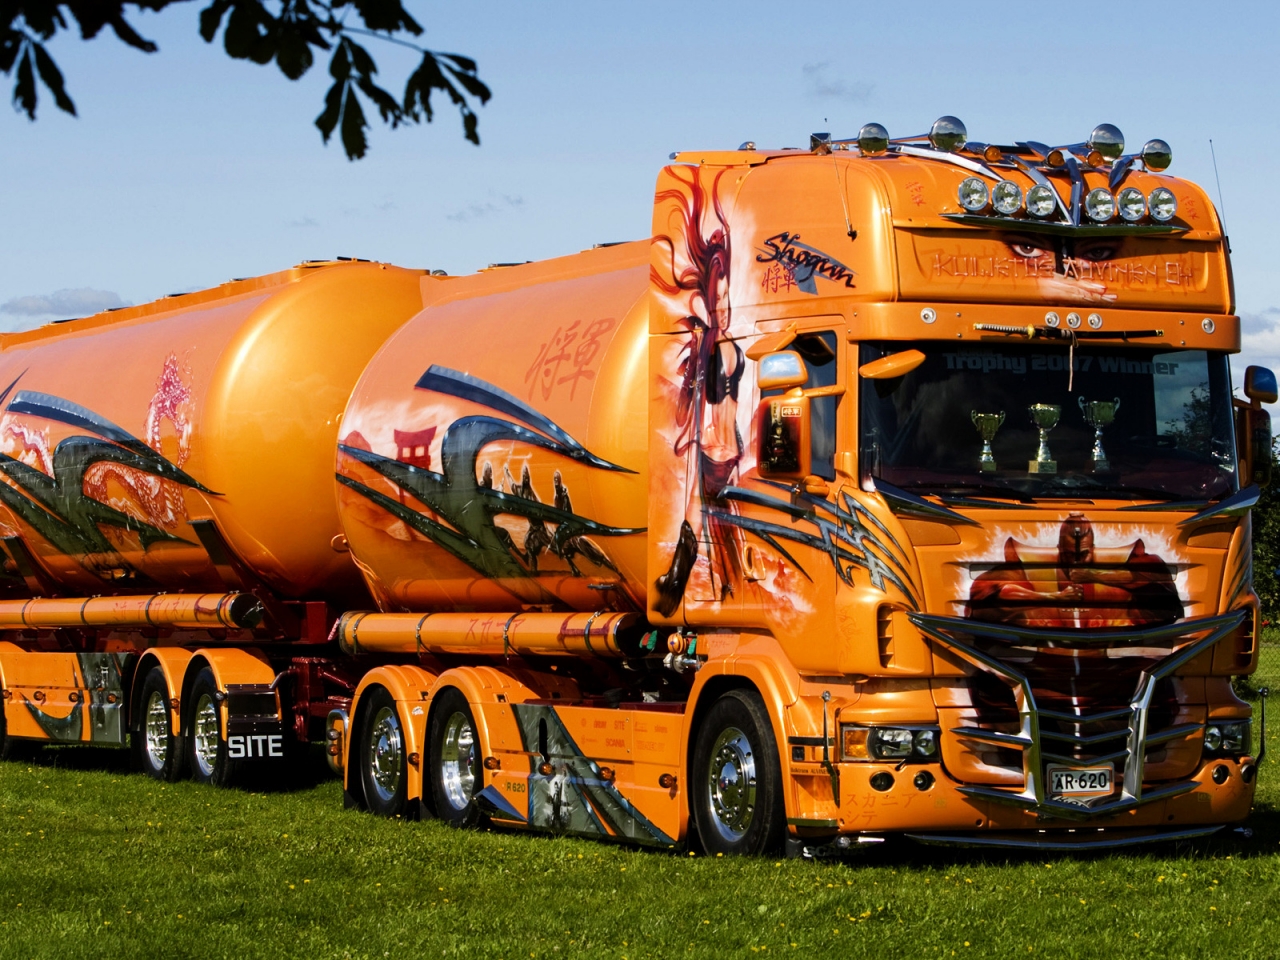 Scania Tanker for 1280 x 960 resolution